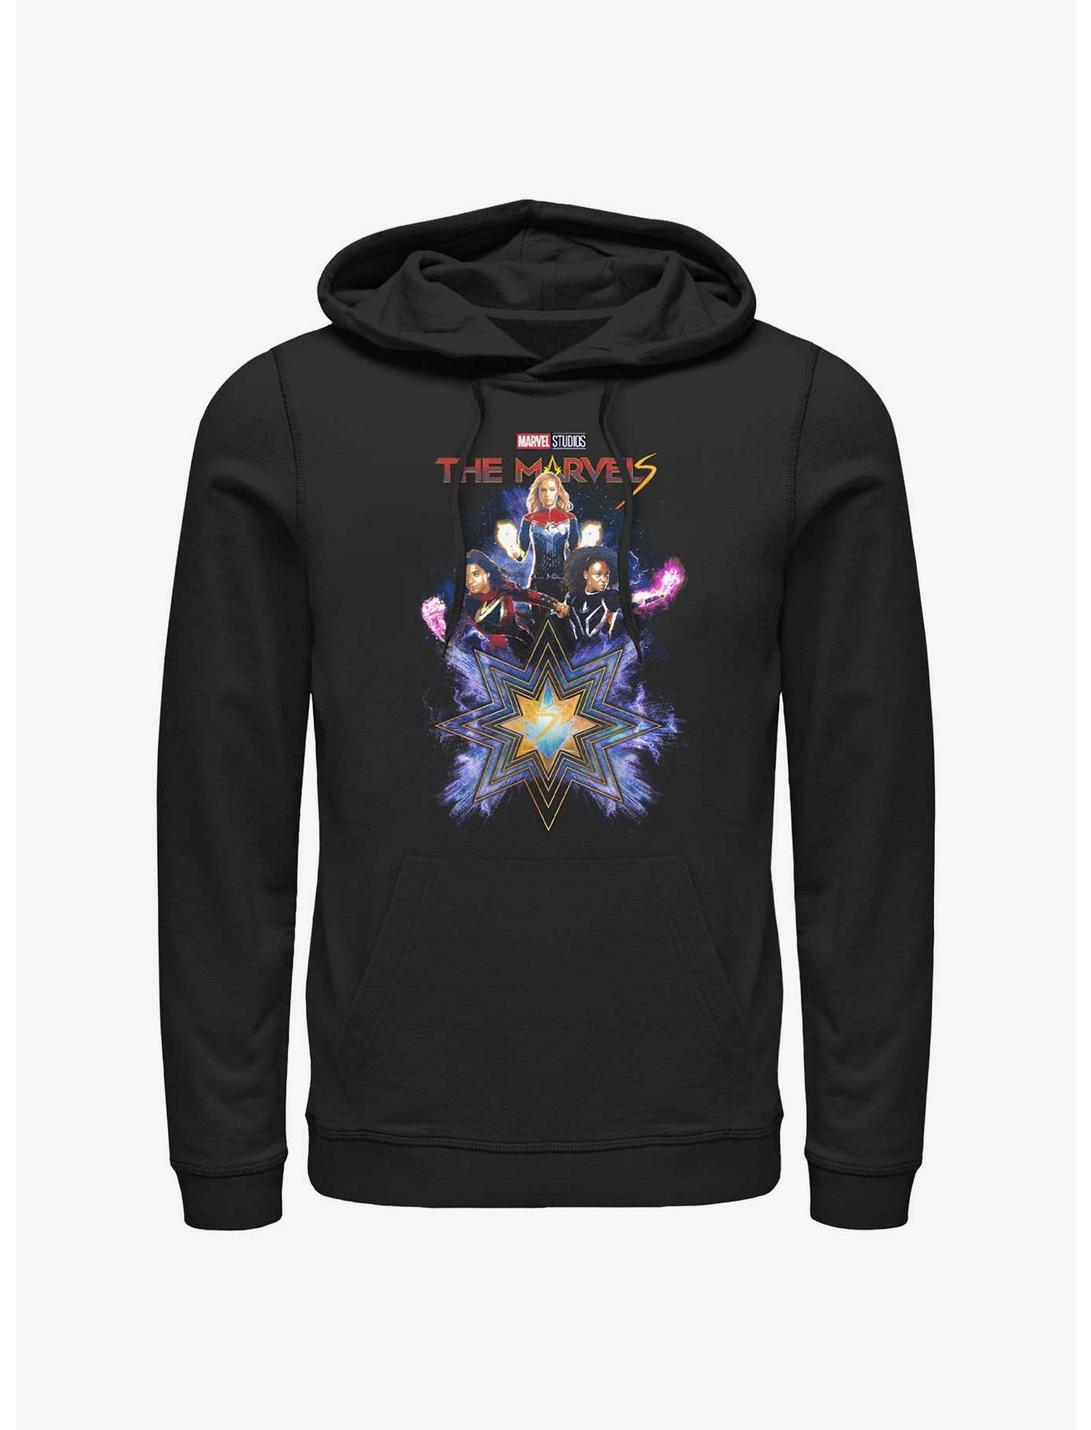 Marvel The Marvels Fabulous Marvels Hoodie Hot Topic Web Exclusive, BLACK, hi-res